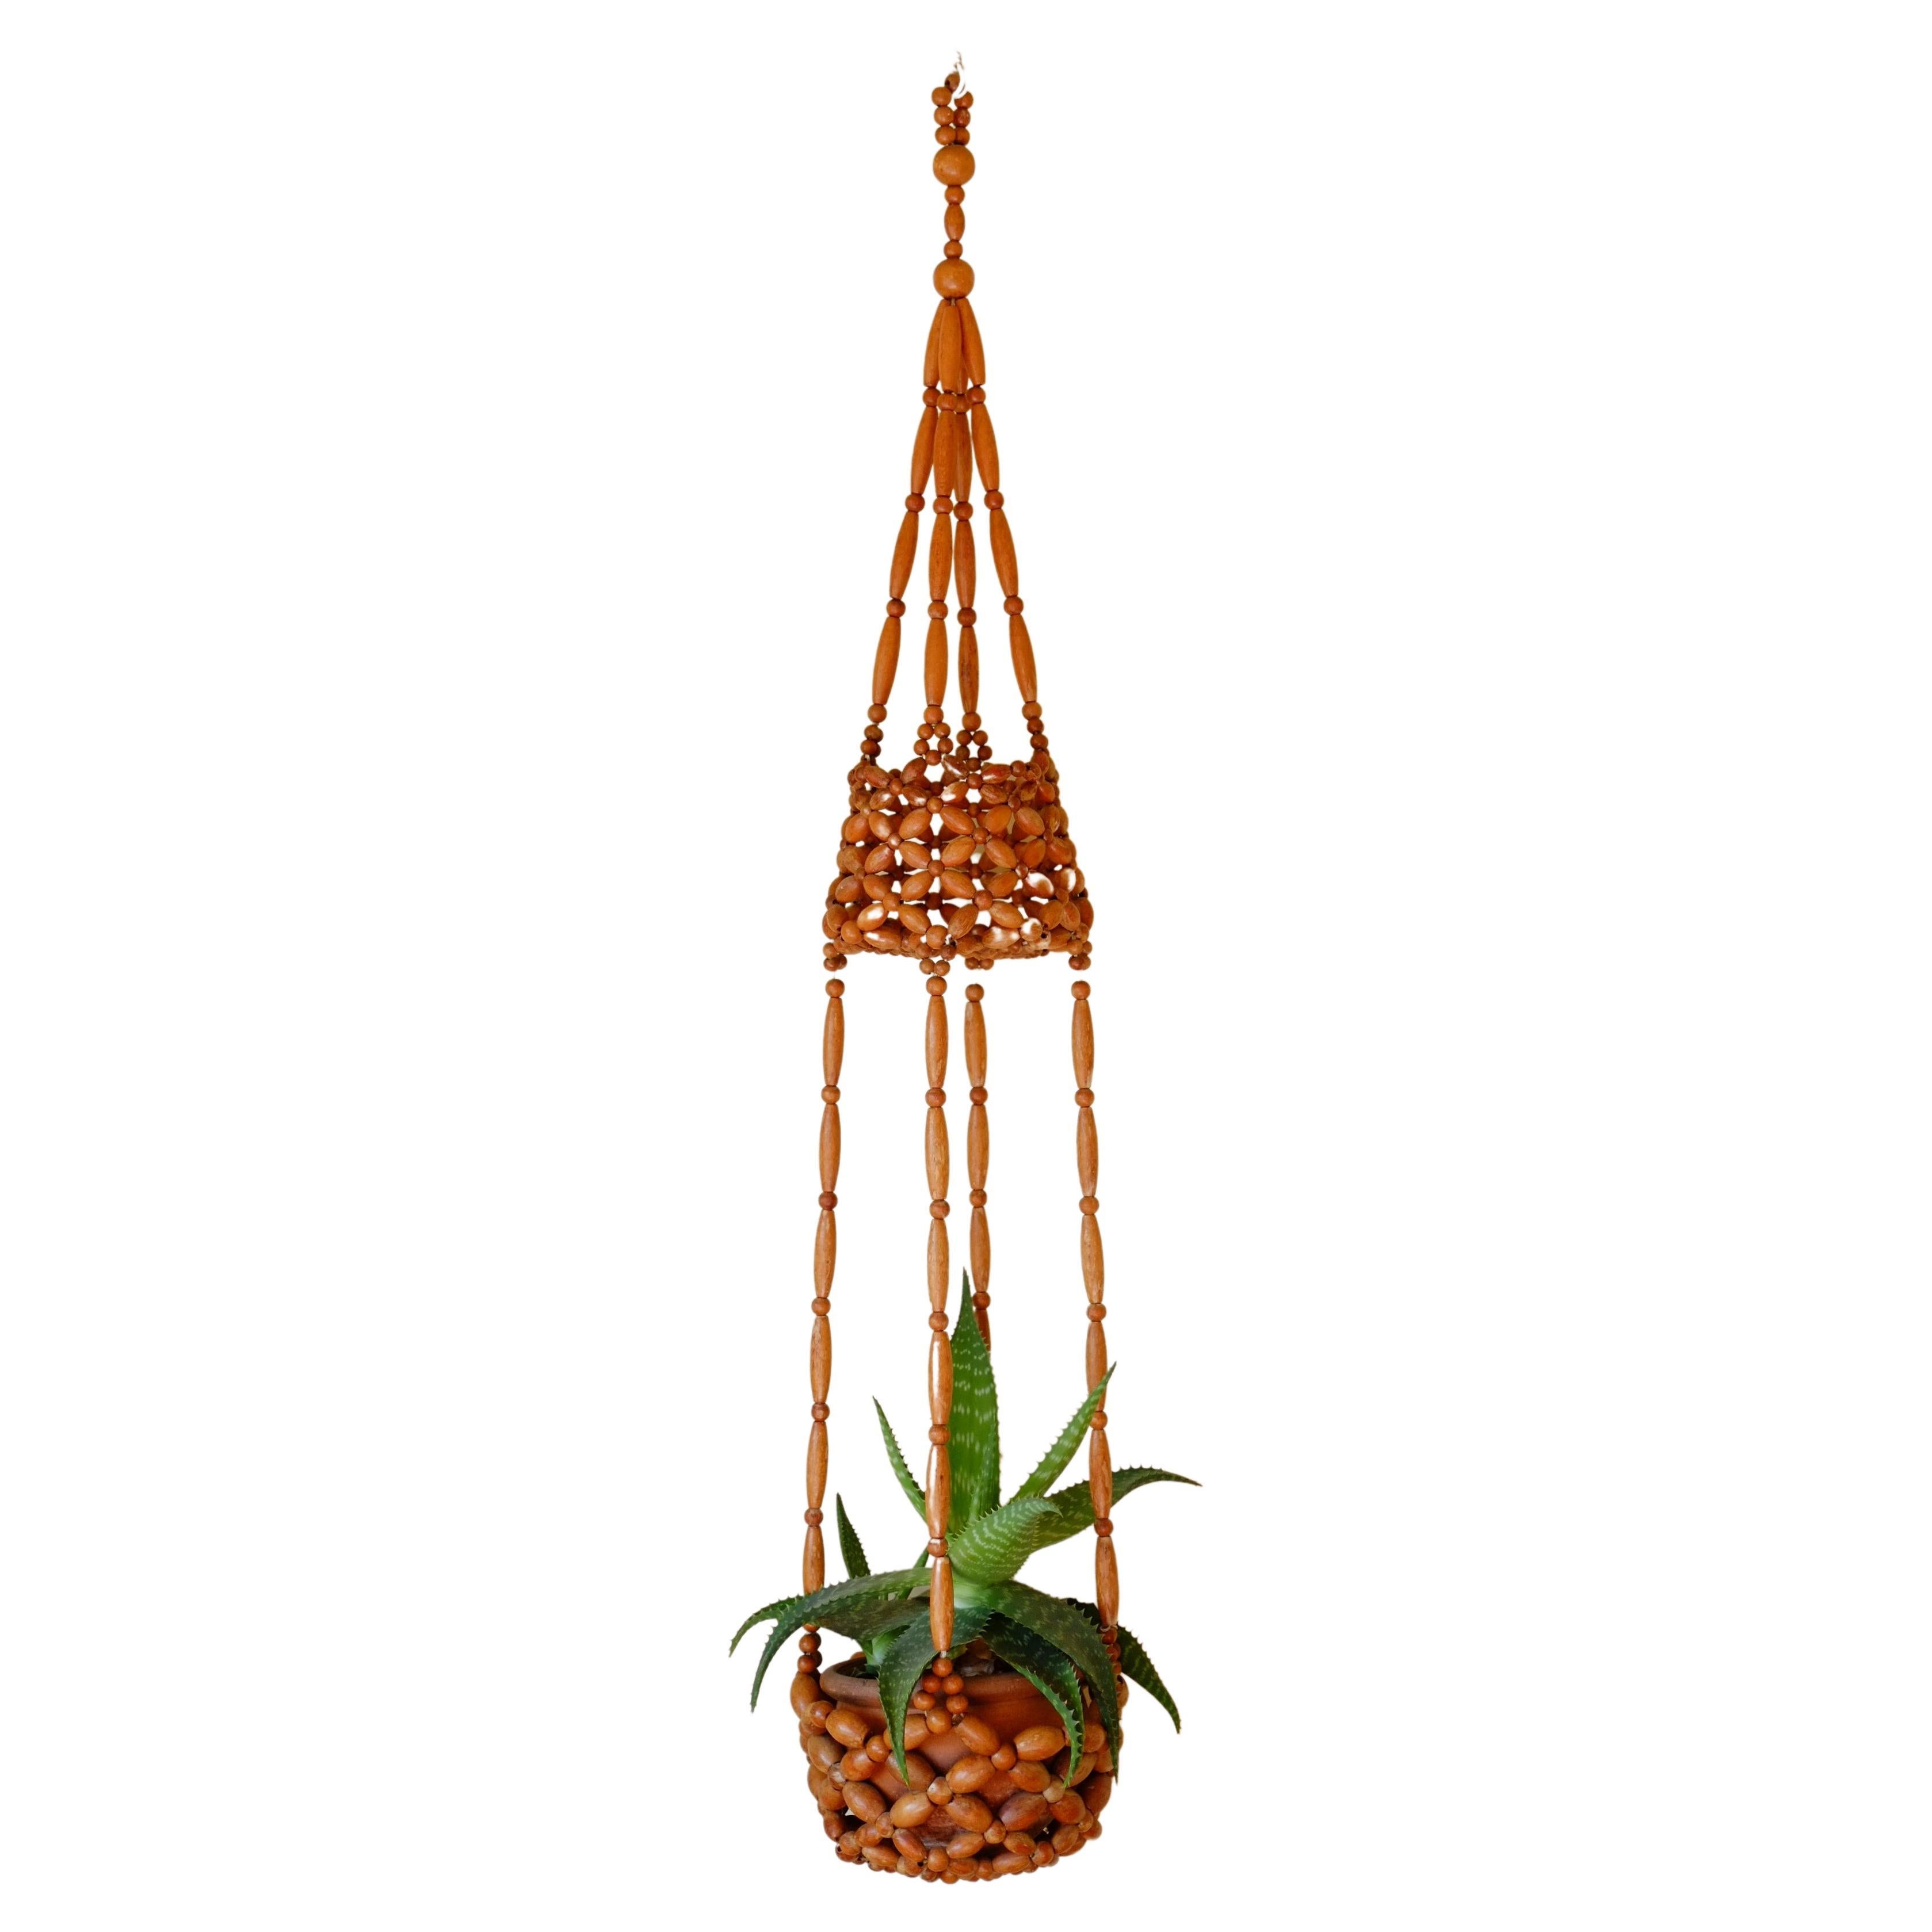 Rare Large Midcentury Beaded Plant Hanger / Hanging Planter For Sale